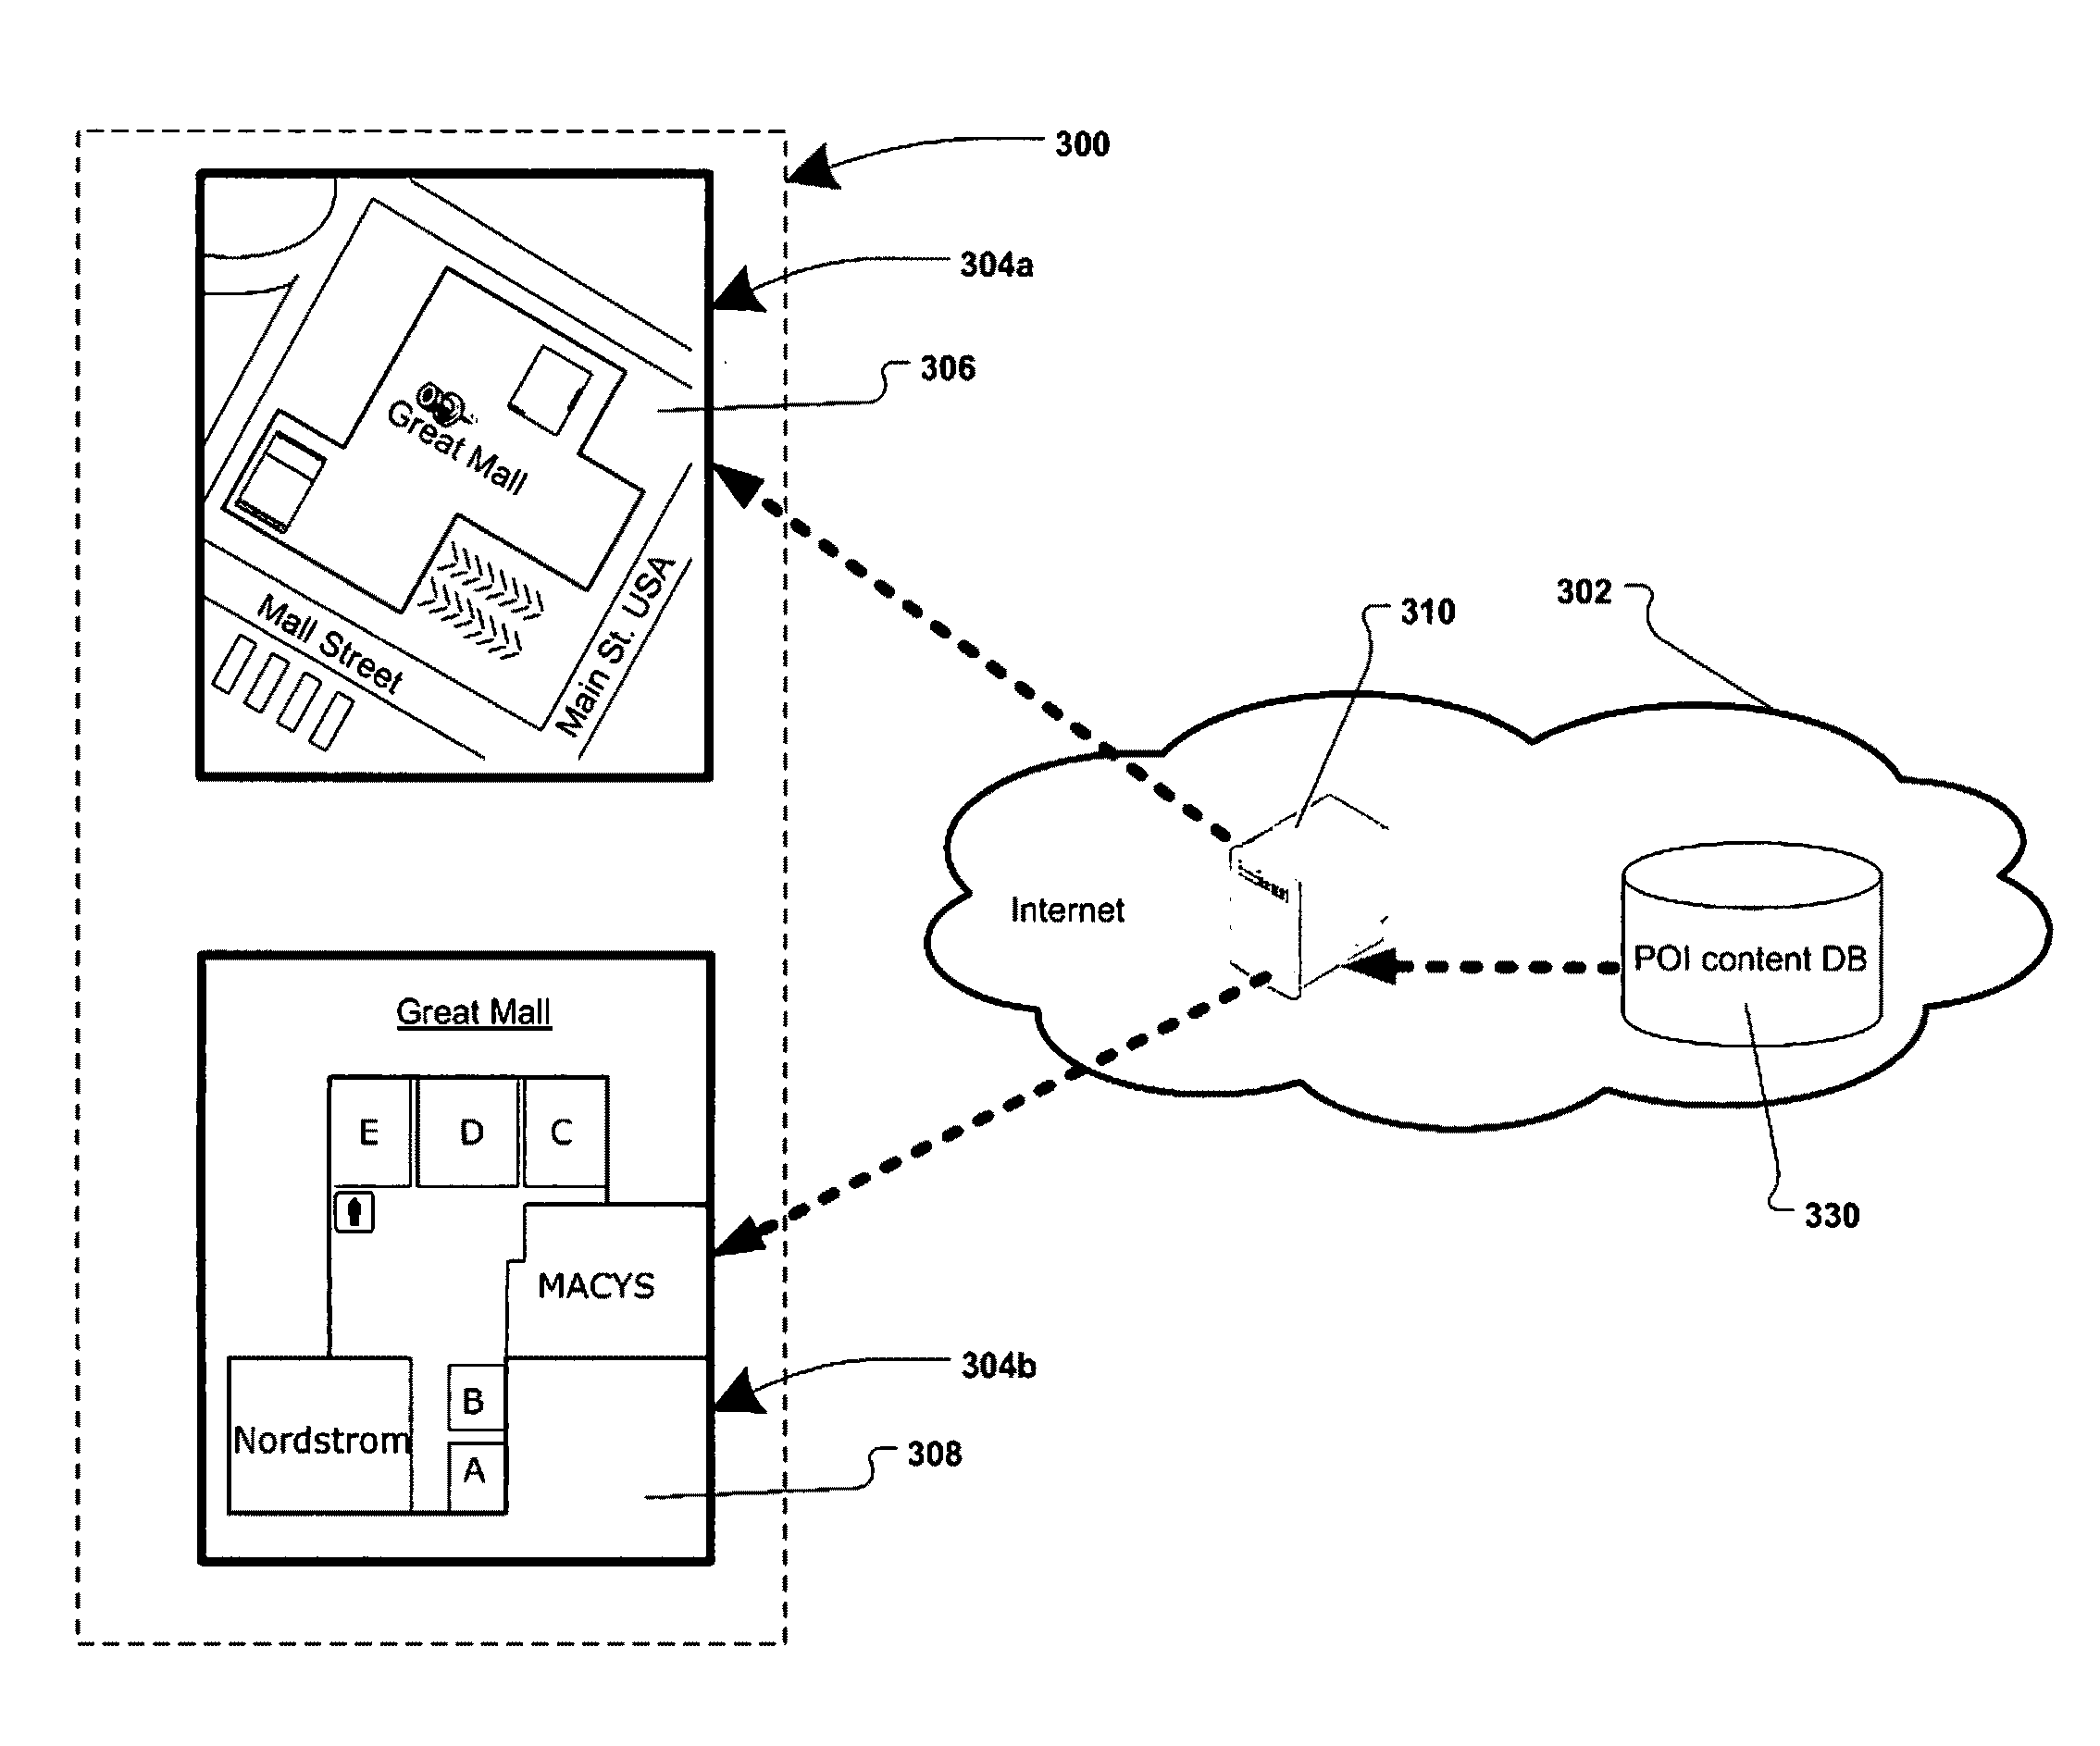 Displaying content associated with electronic mapping systems